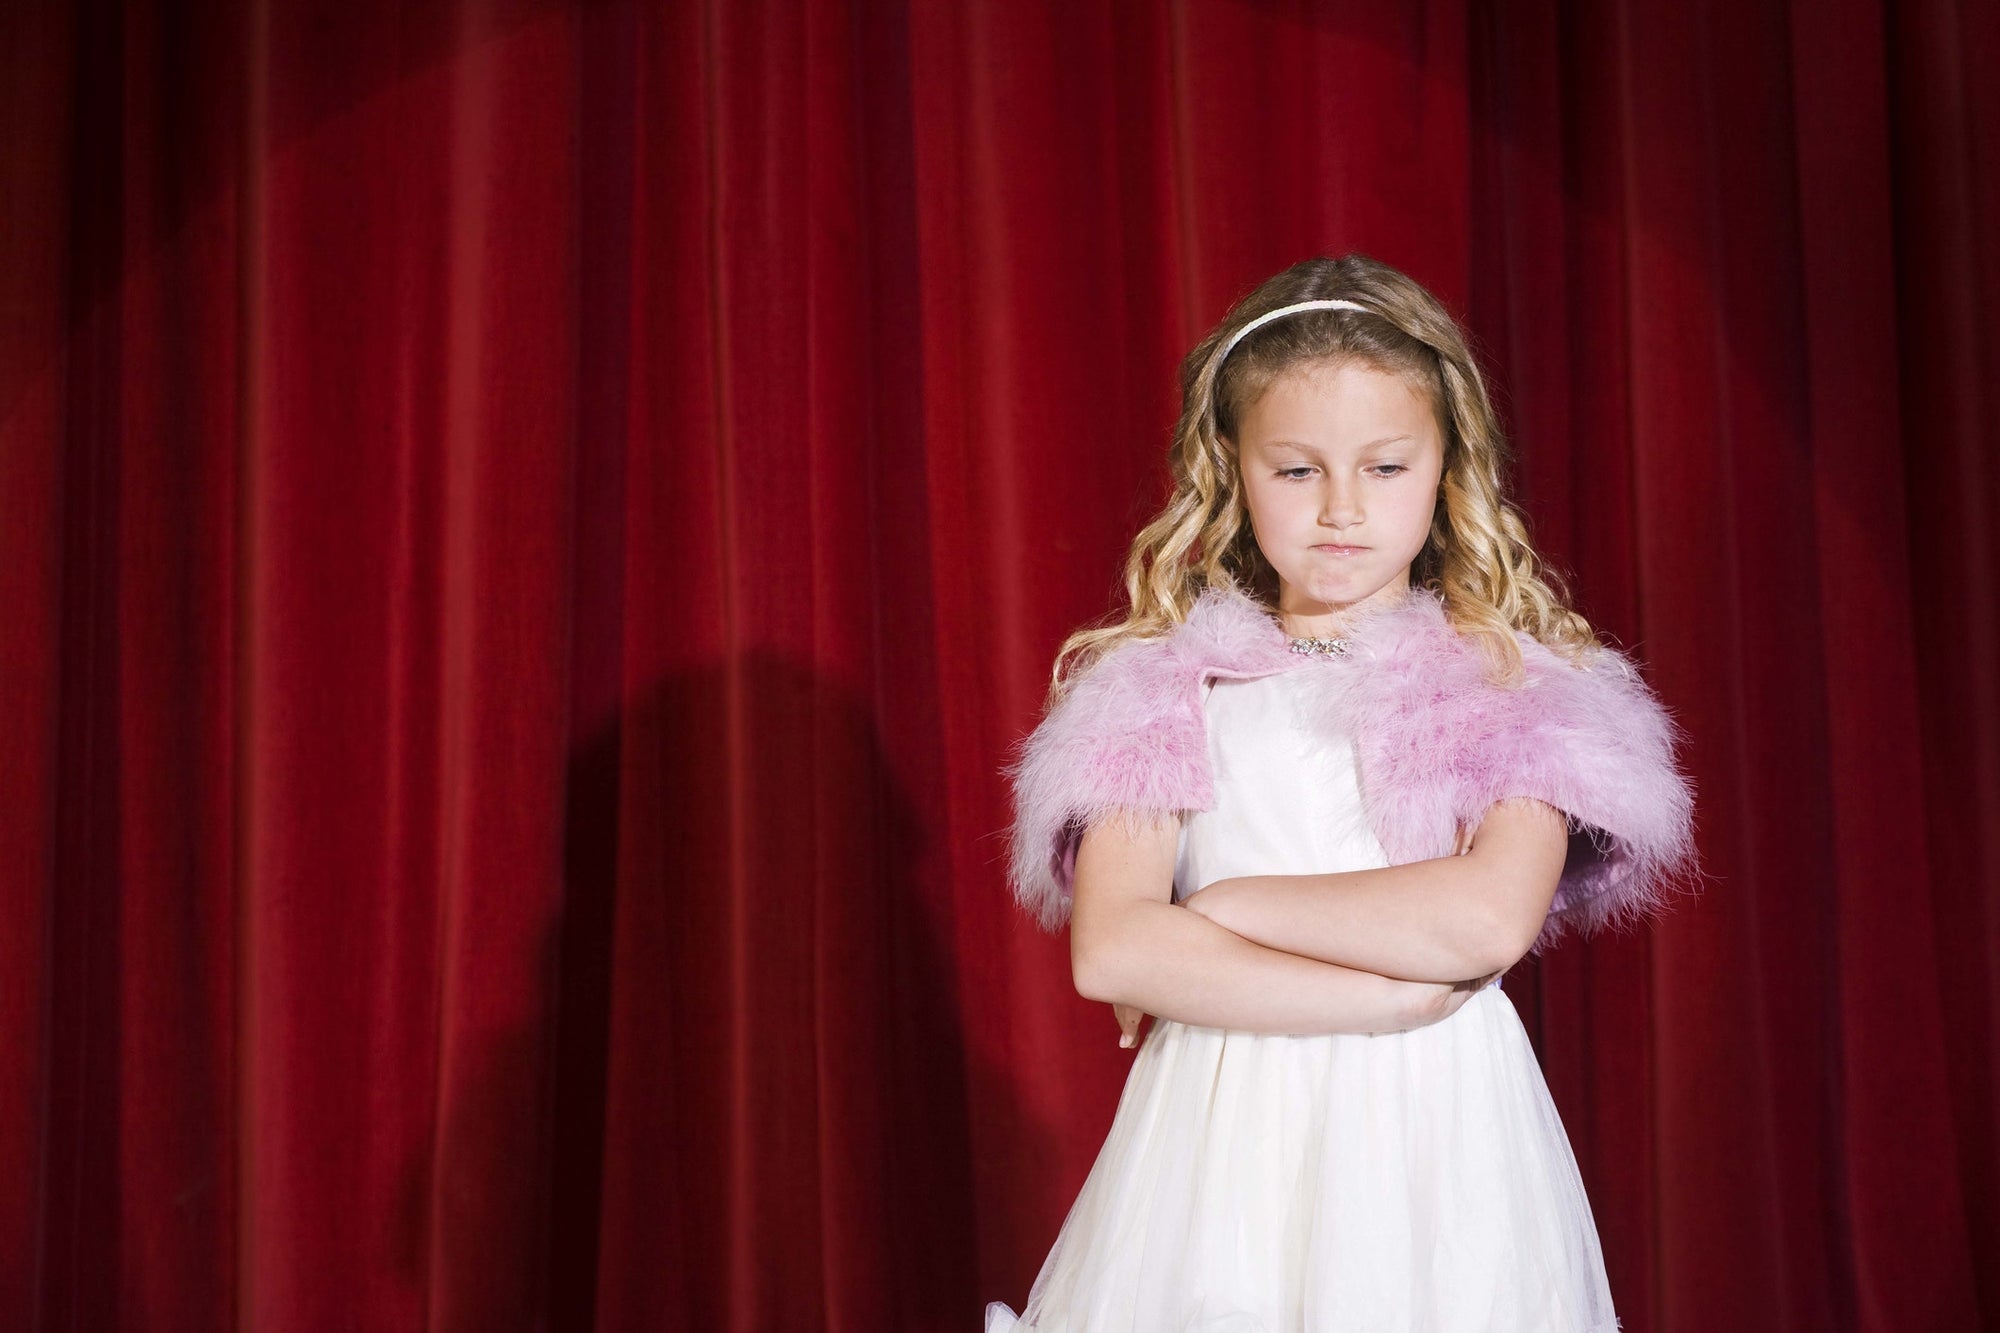 Front view of young girl standing in spotlight against red stage curtain looking annoyed